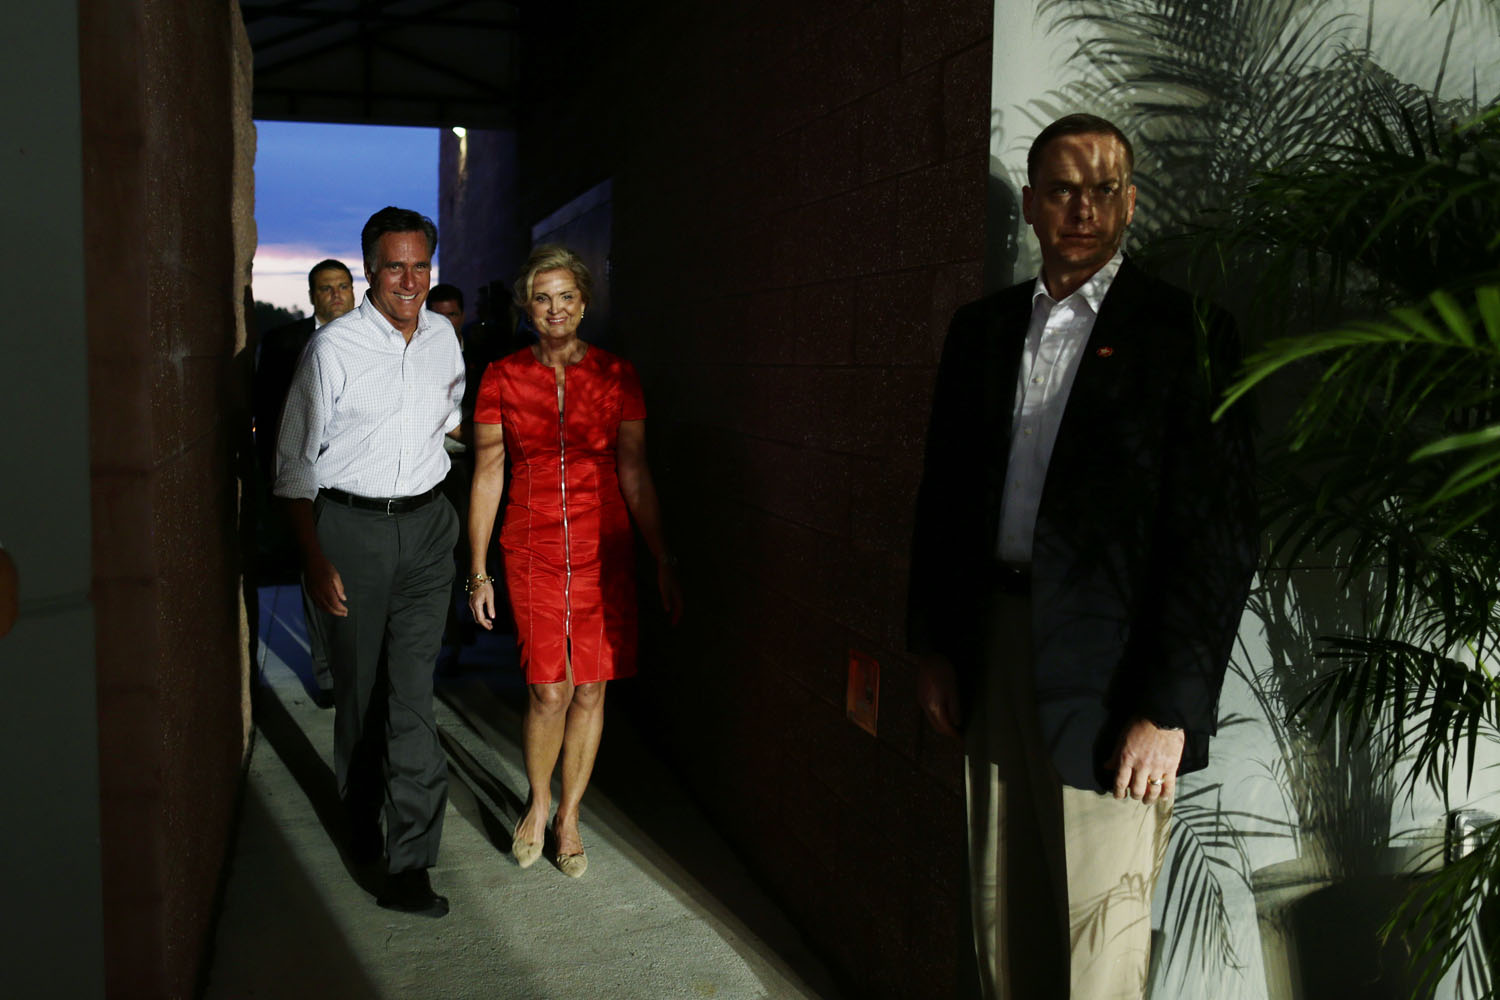 Oct. 6, 2012. Republican presidential candidate Mitt Romney and his wife Ann walk backstage before his campaign appearance in Apopka, Fla.